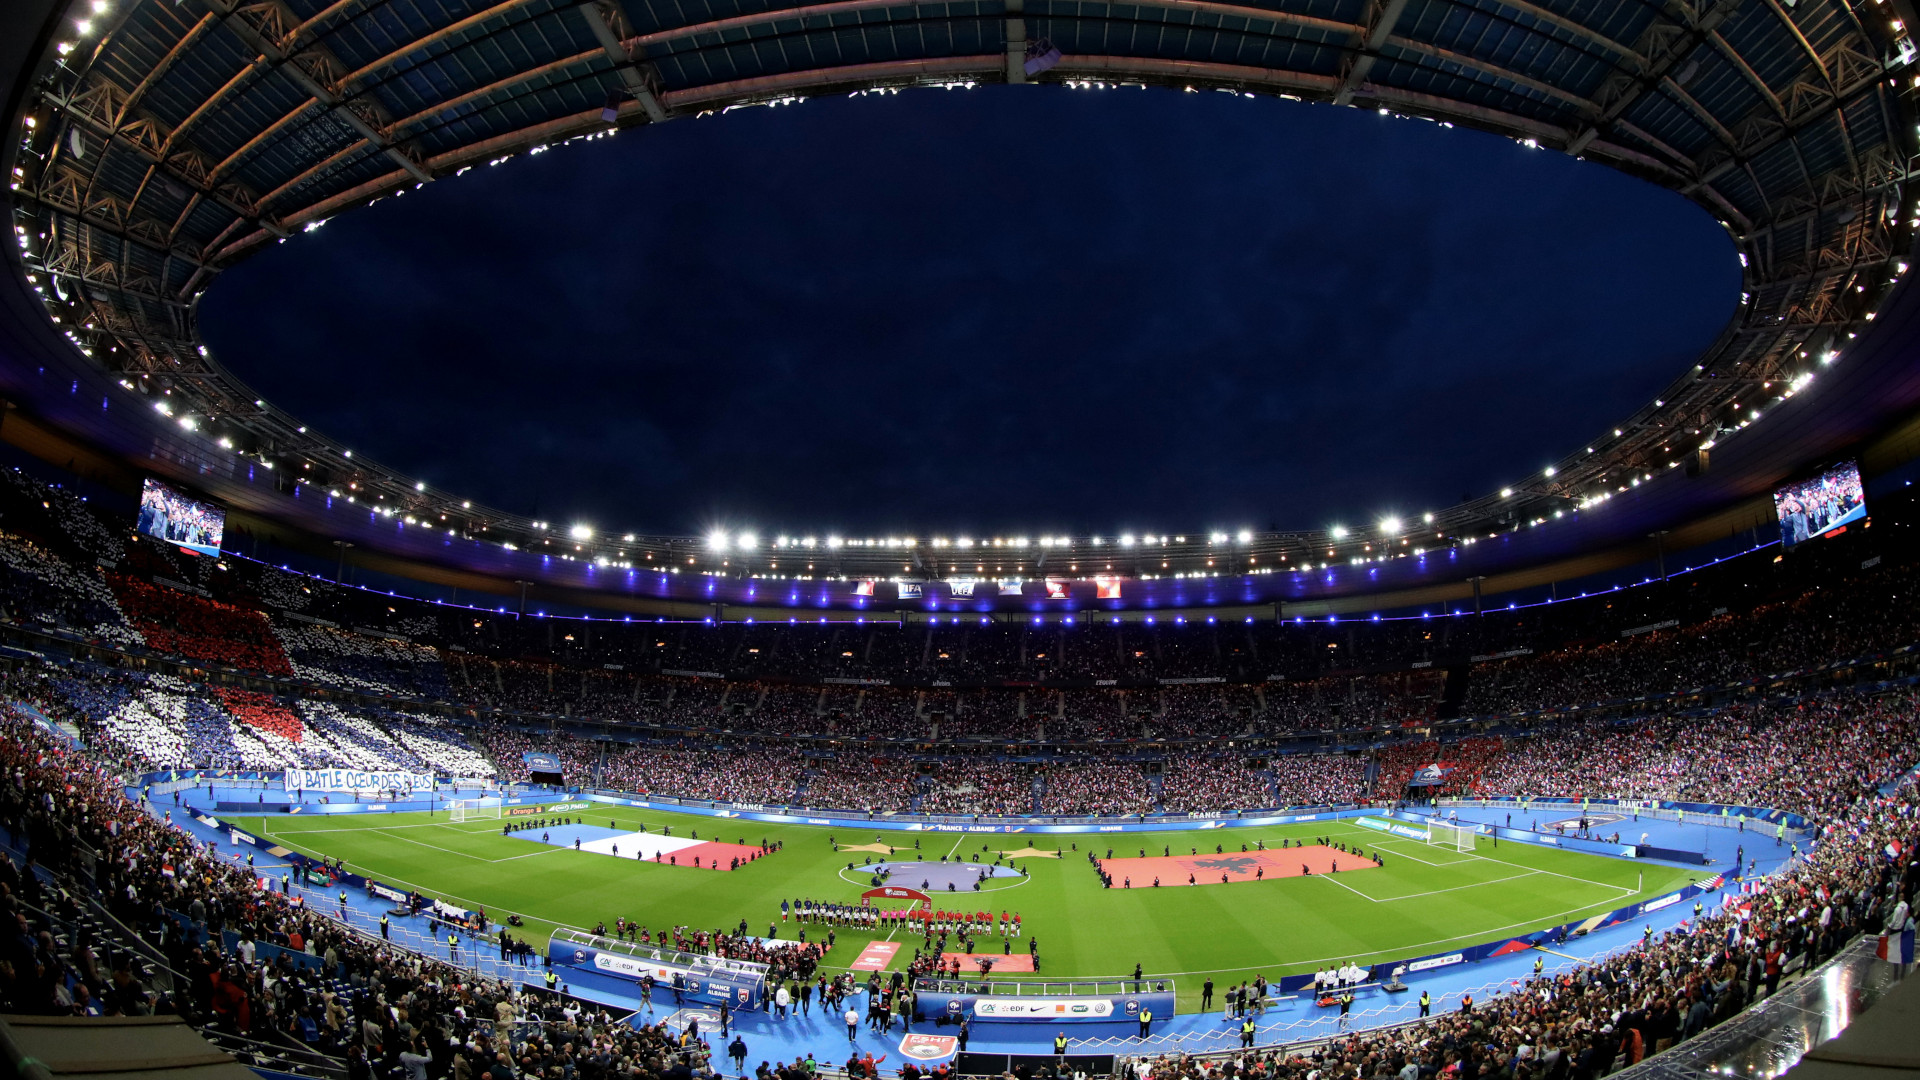 General view of the Stade de France before a football match